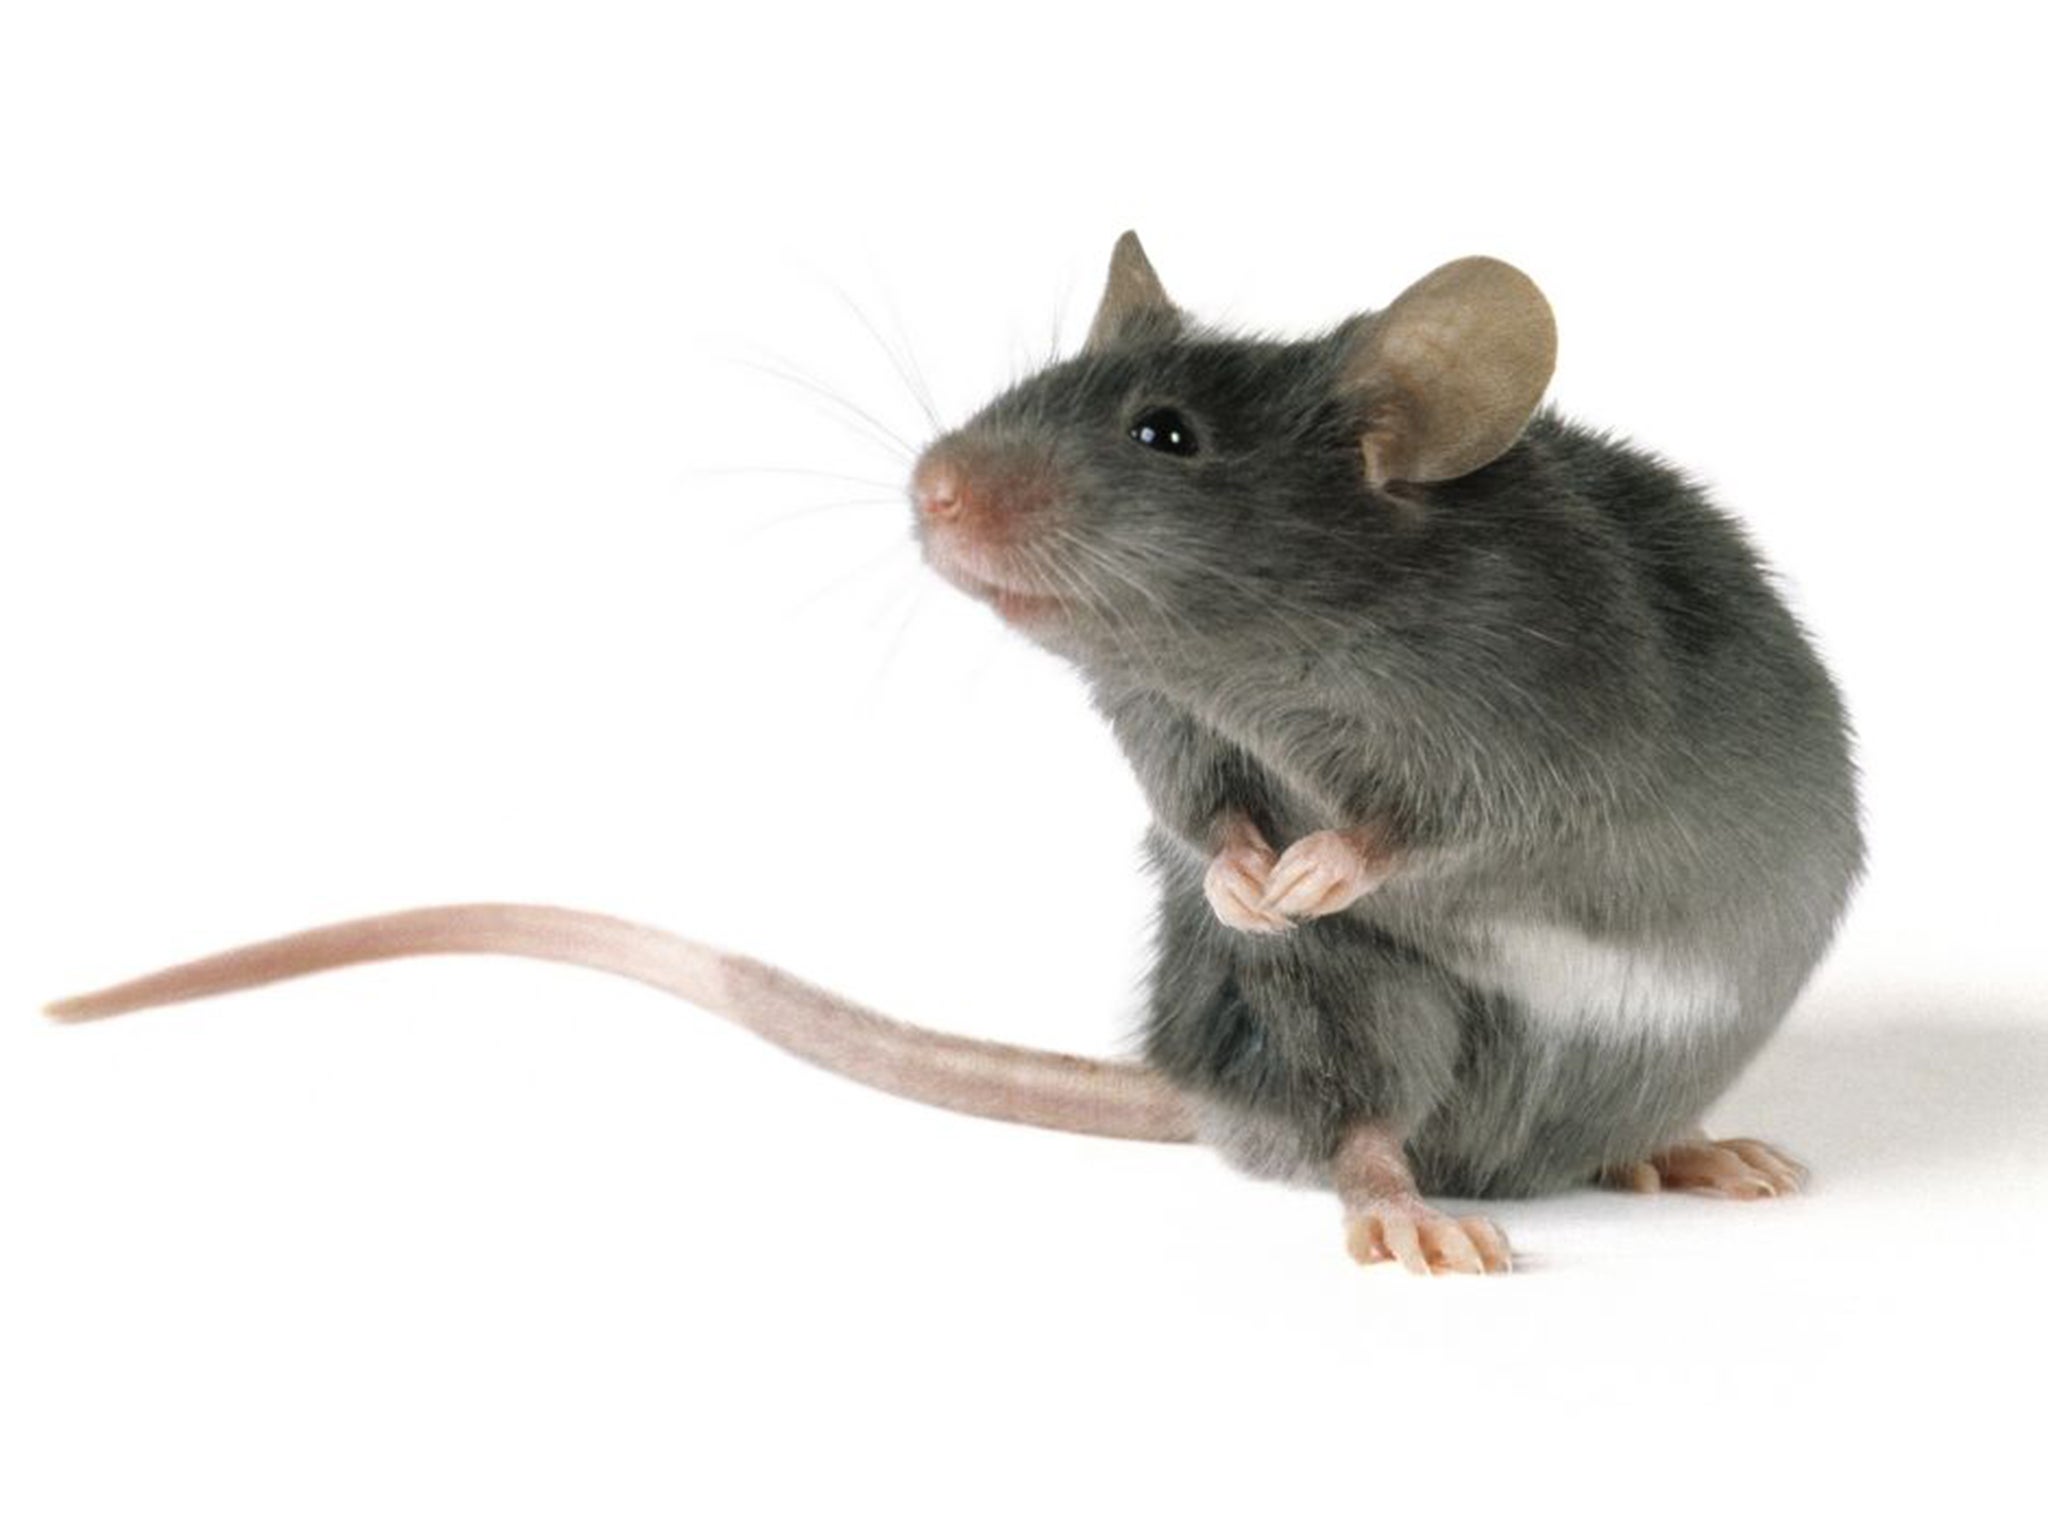 The scientists were able to make brain cells in the mouse fire using a laser